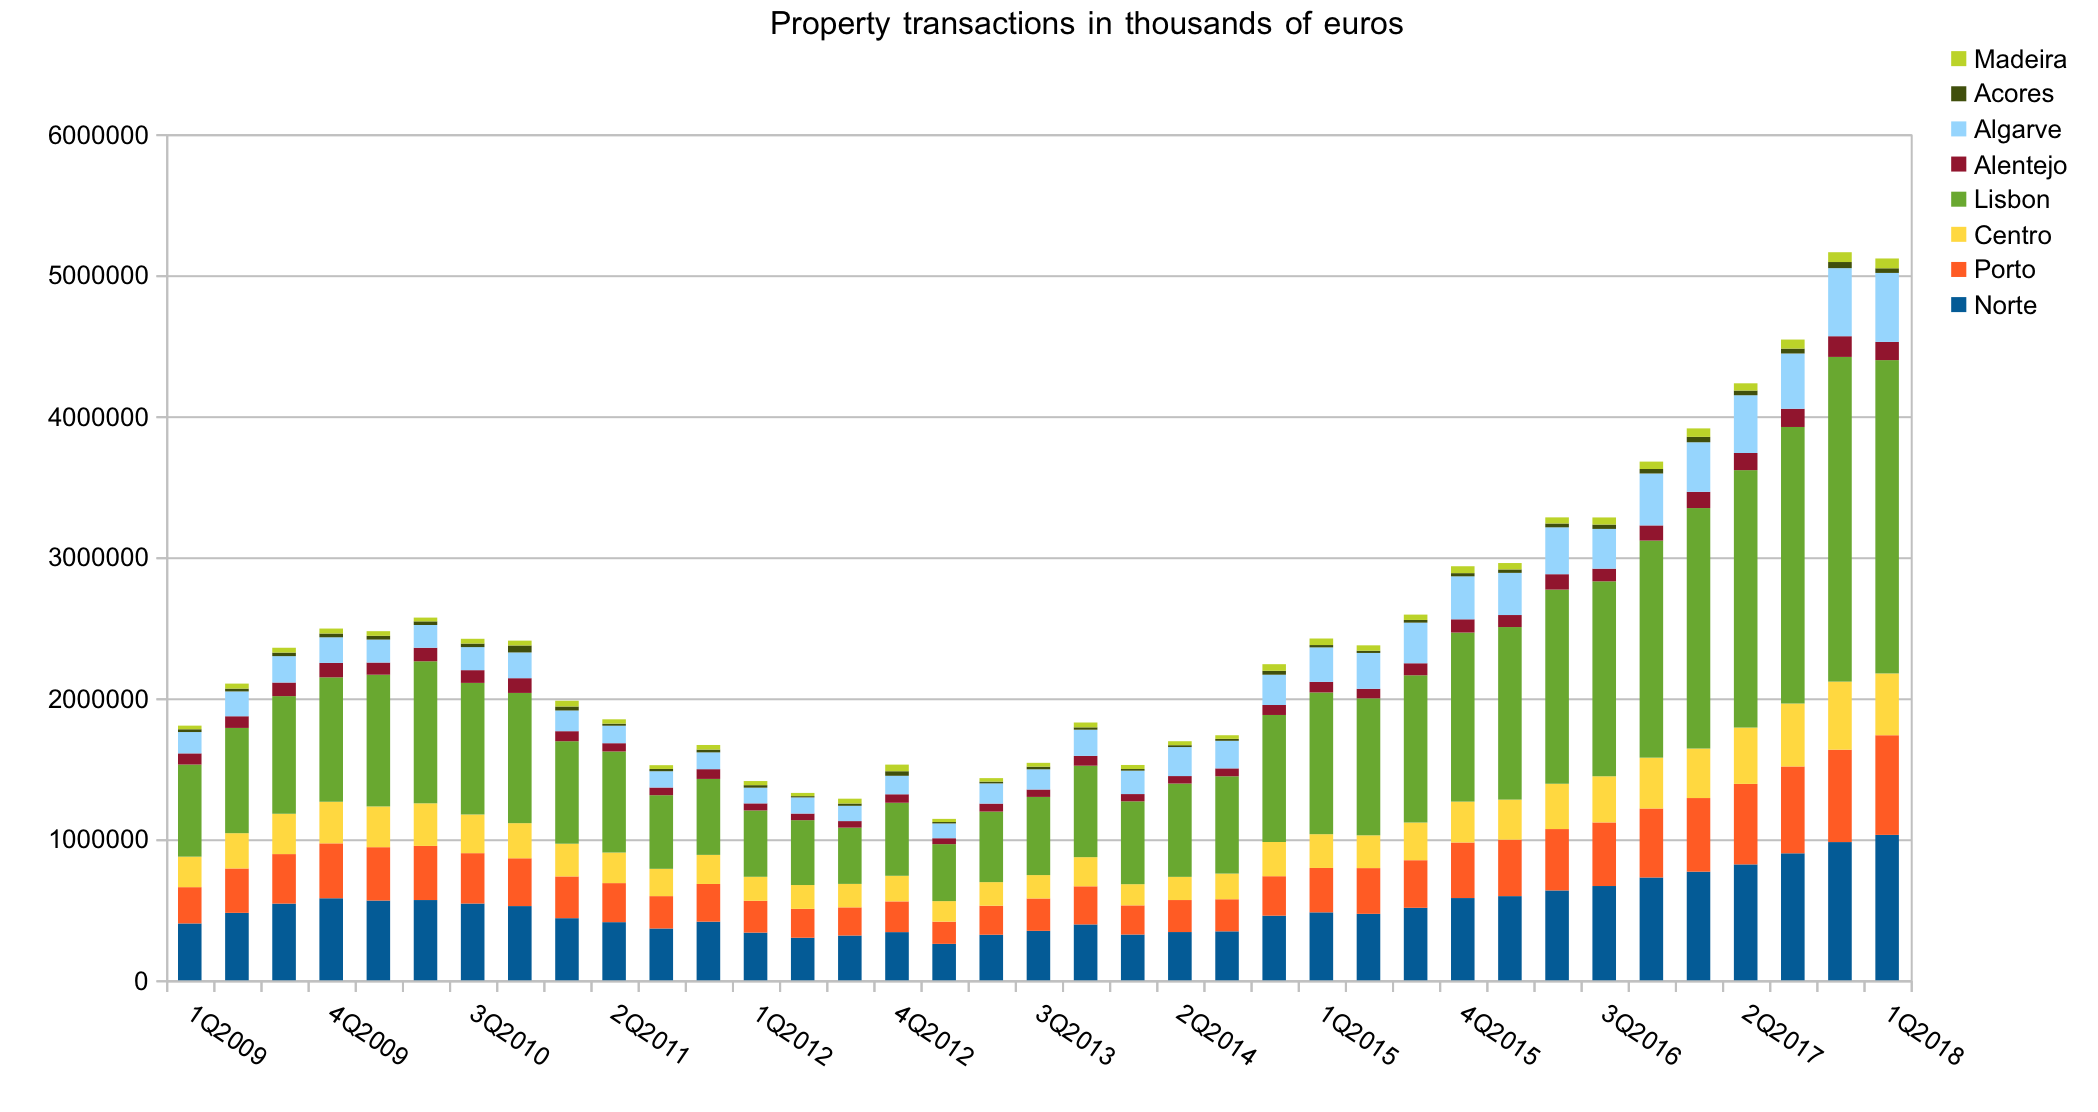 property transactions in billions of euros